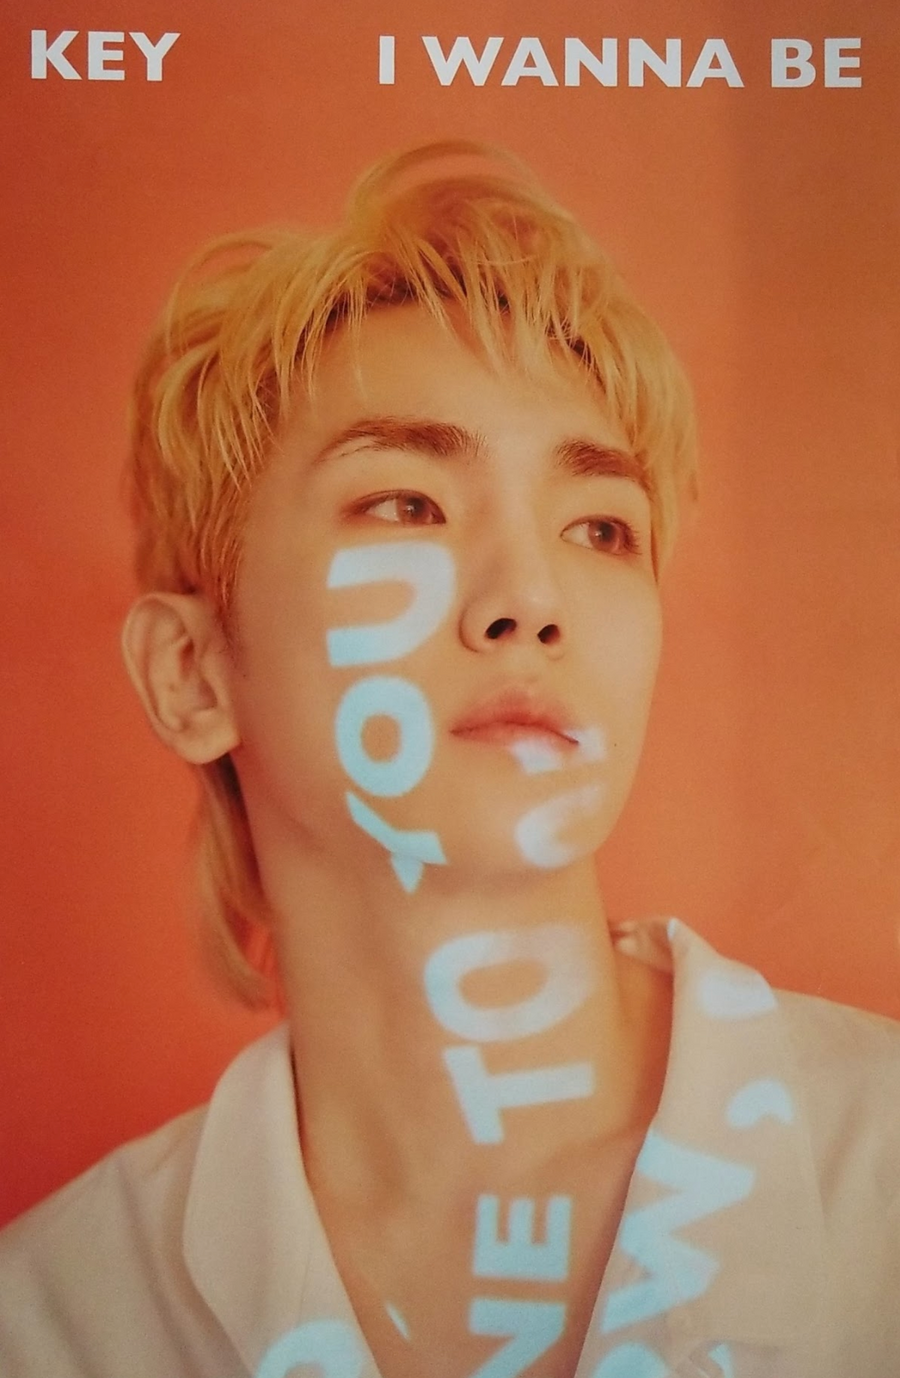 Key 1st Repackage Album I Wanna Be Official Poster - Photo Concept 2